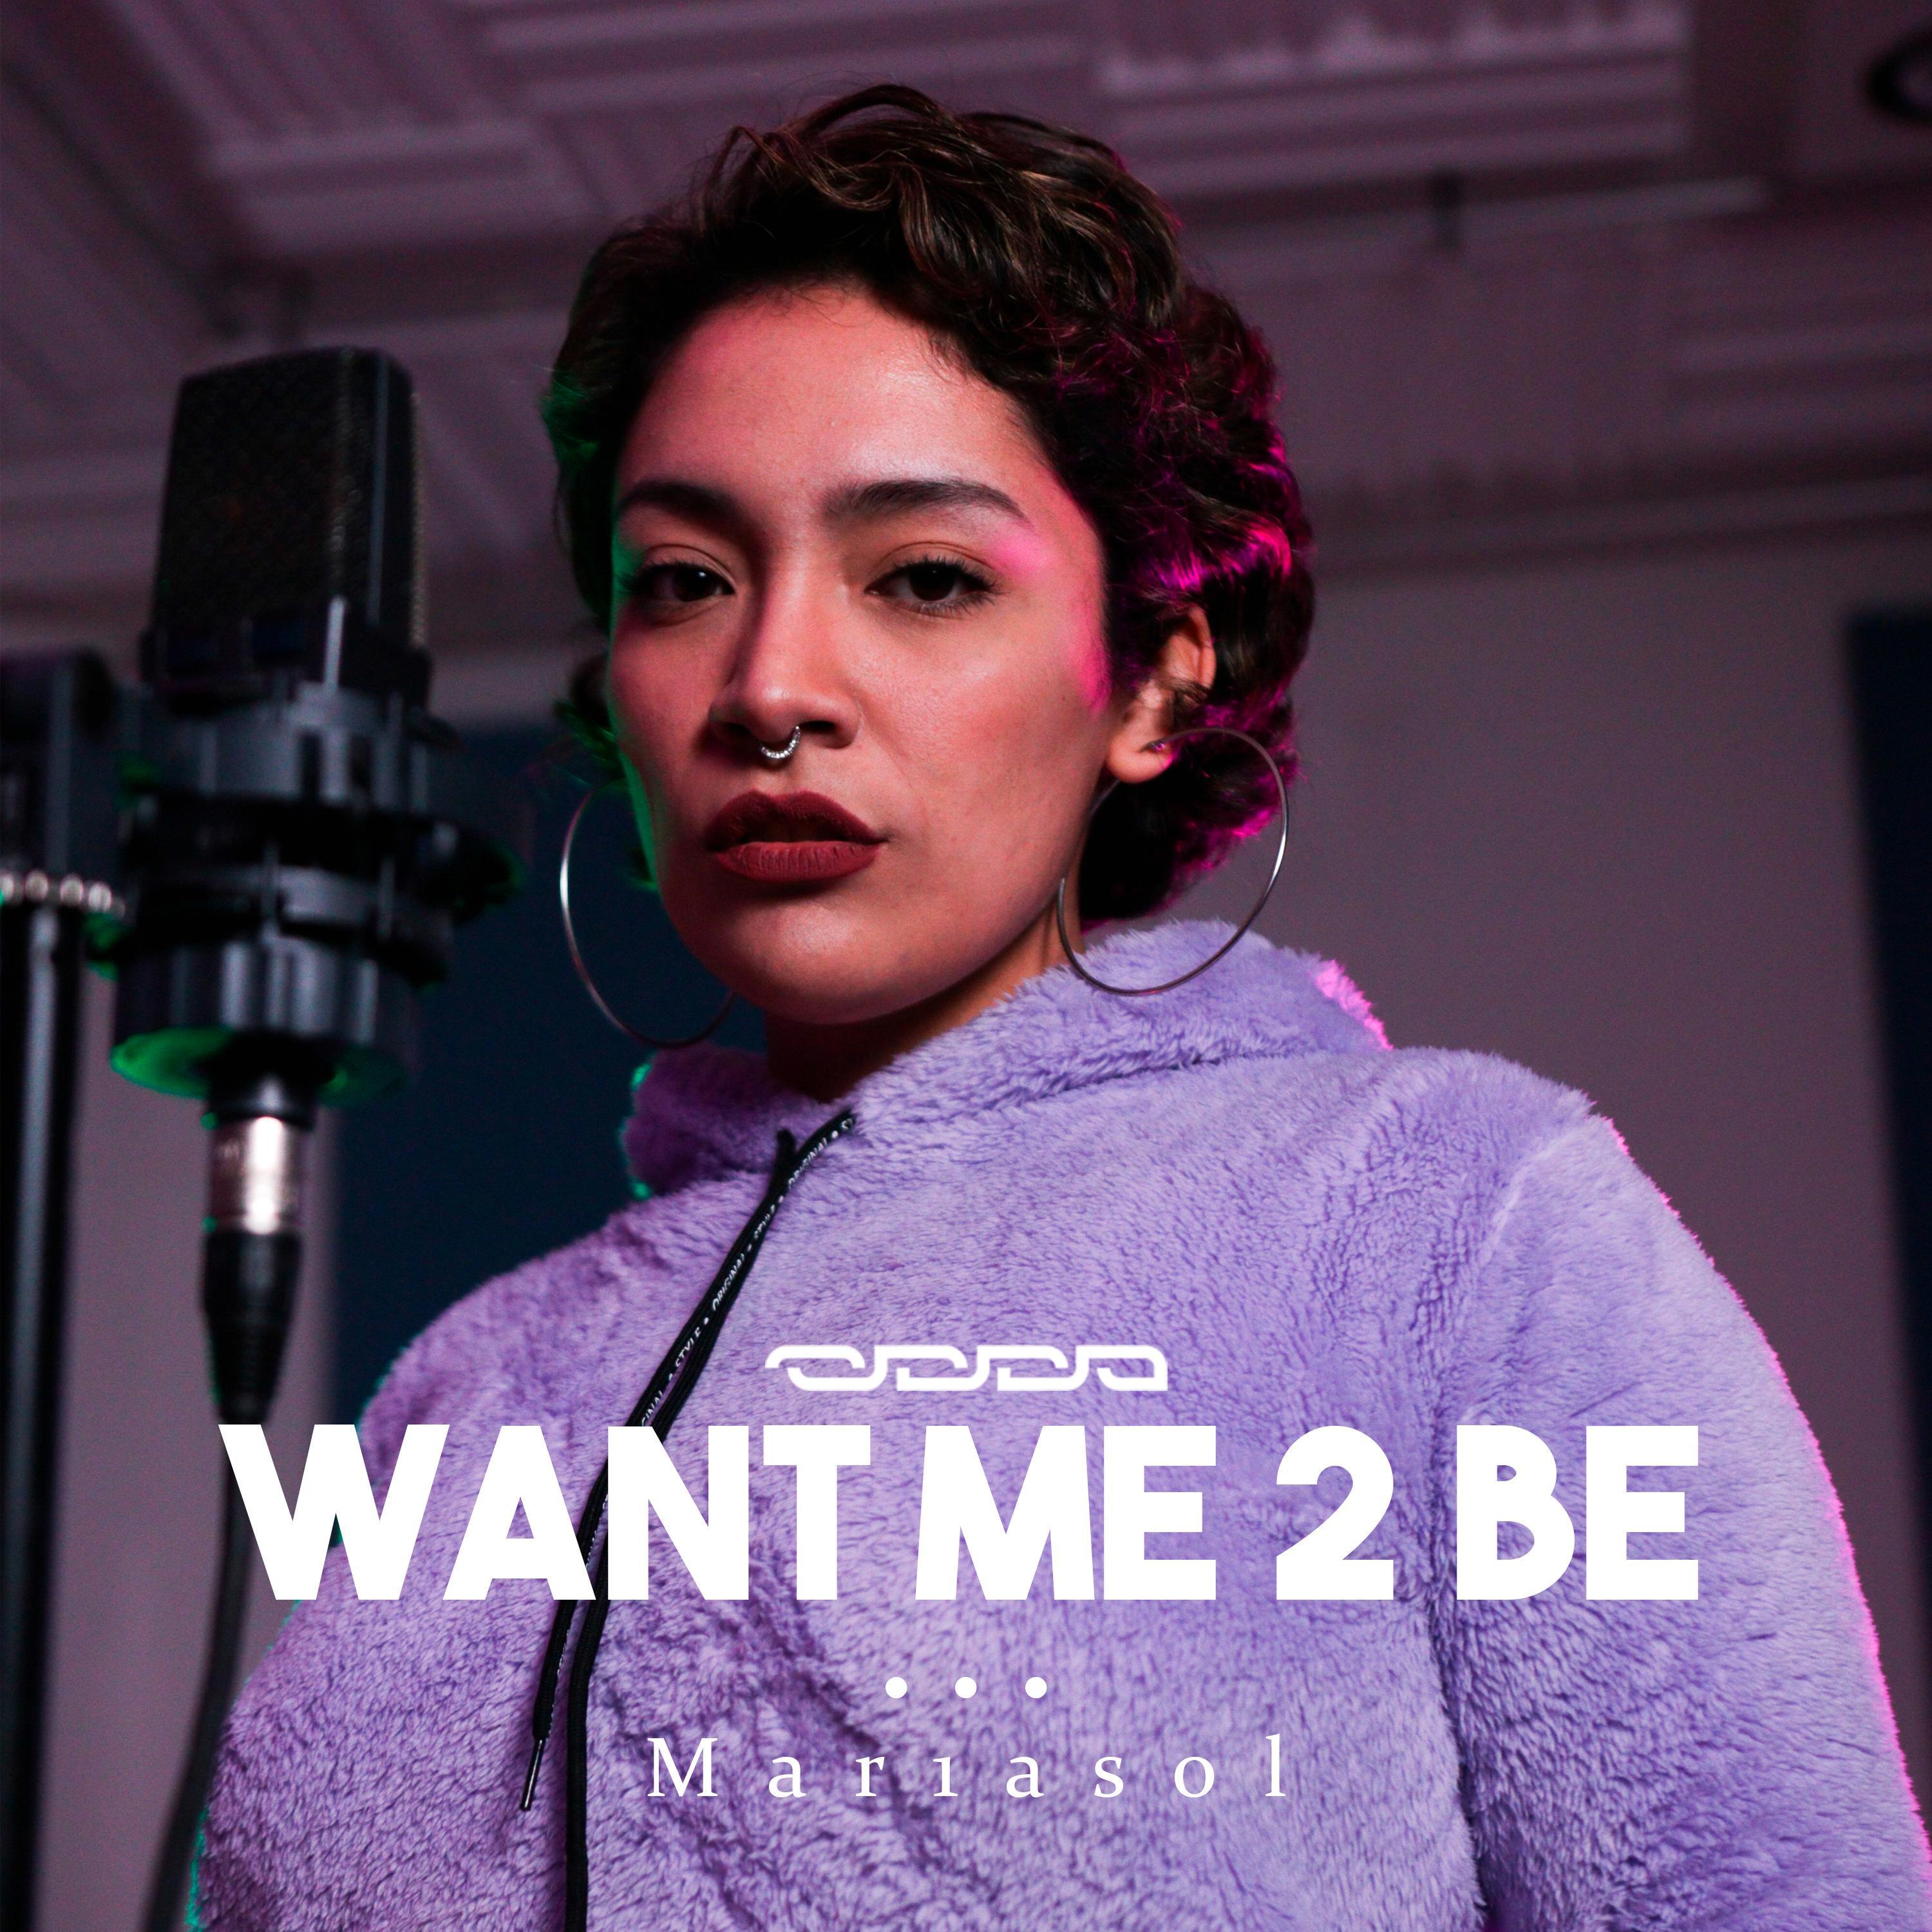 Odda Sessions - Want Me 2 Be (feat. Mar1asol)